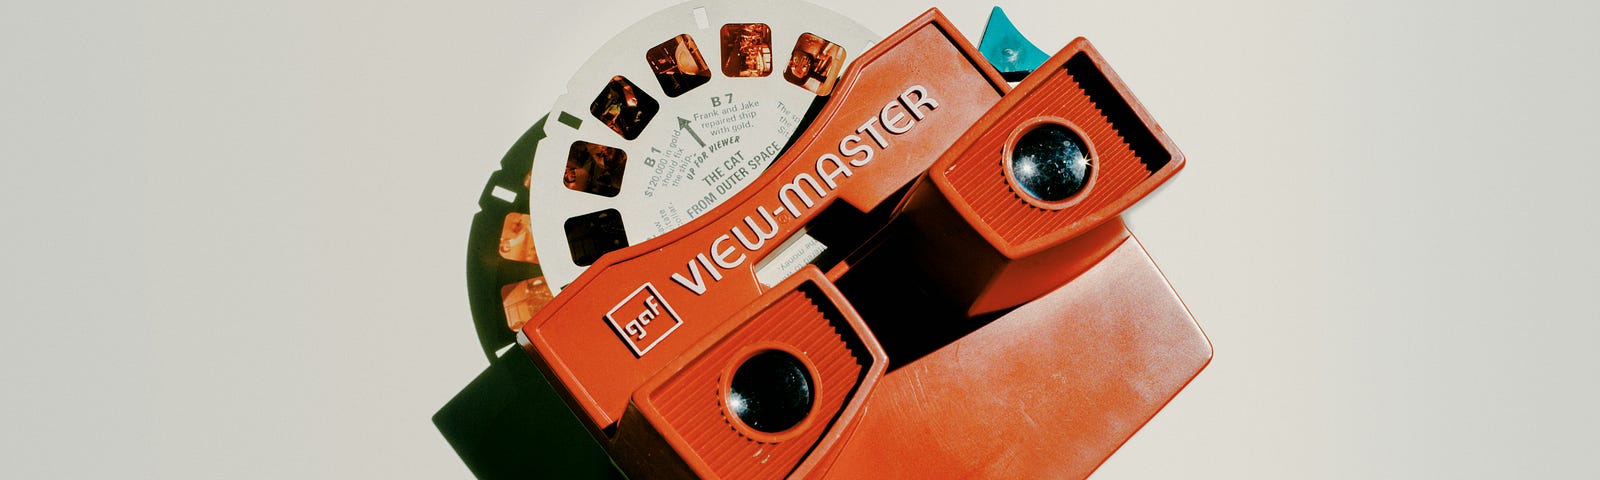 An old viewmaster toy from the sixties.